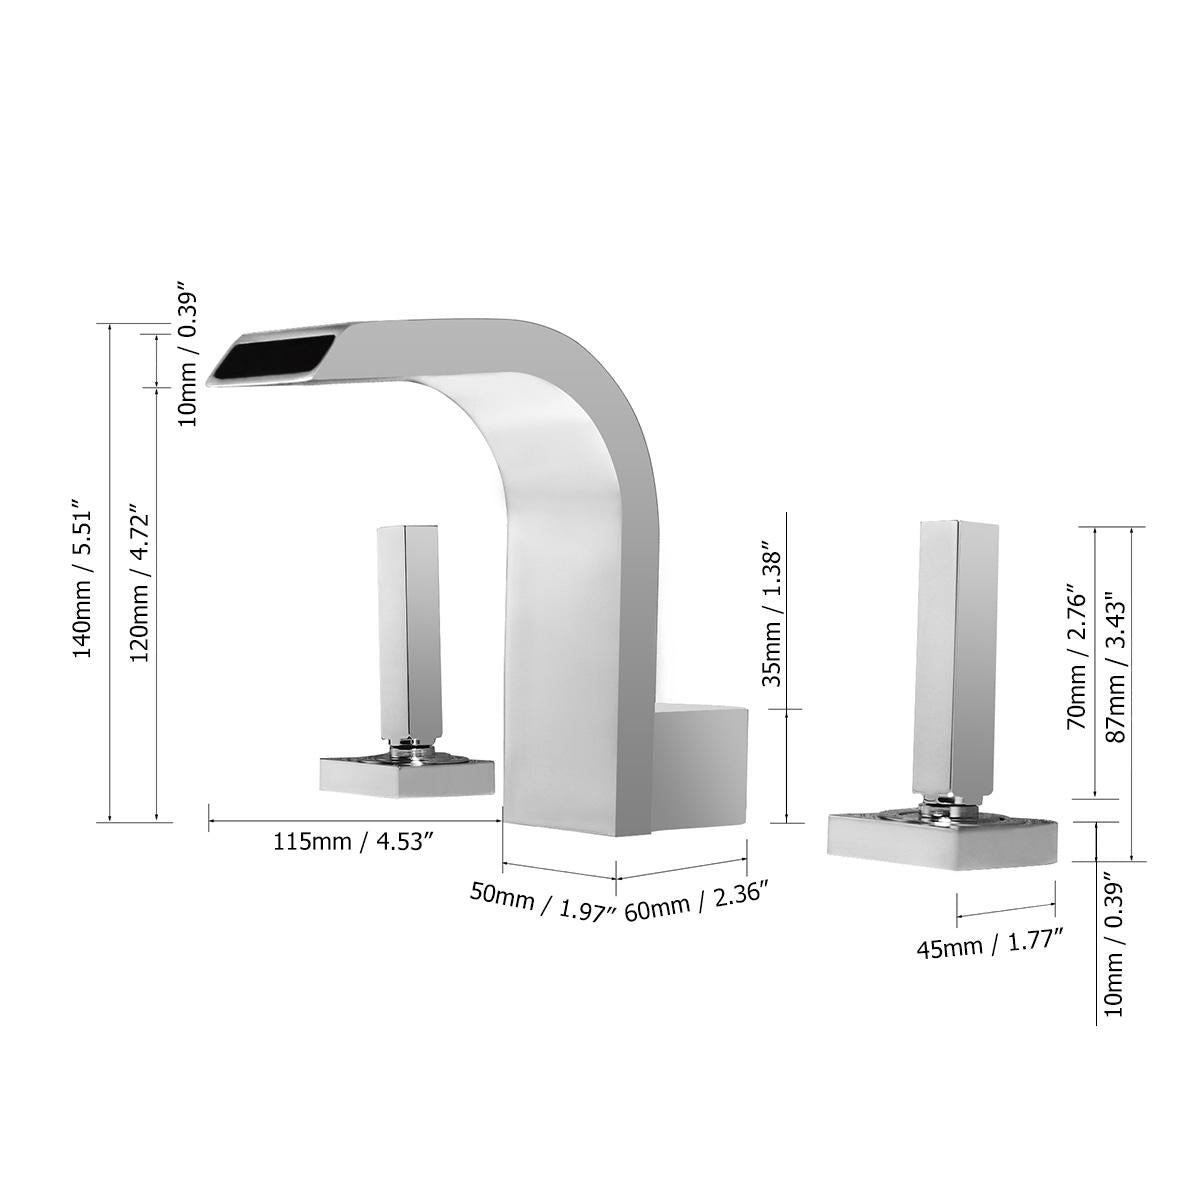 Contemporary Widespread Waterfall Spout Deck Mounted Bathroom Sink Faucet Double Handle Solid Brass in Polished Chrome